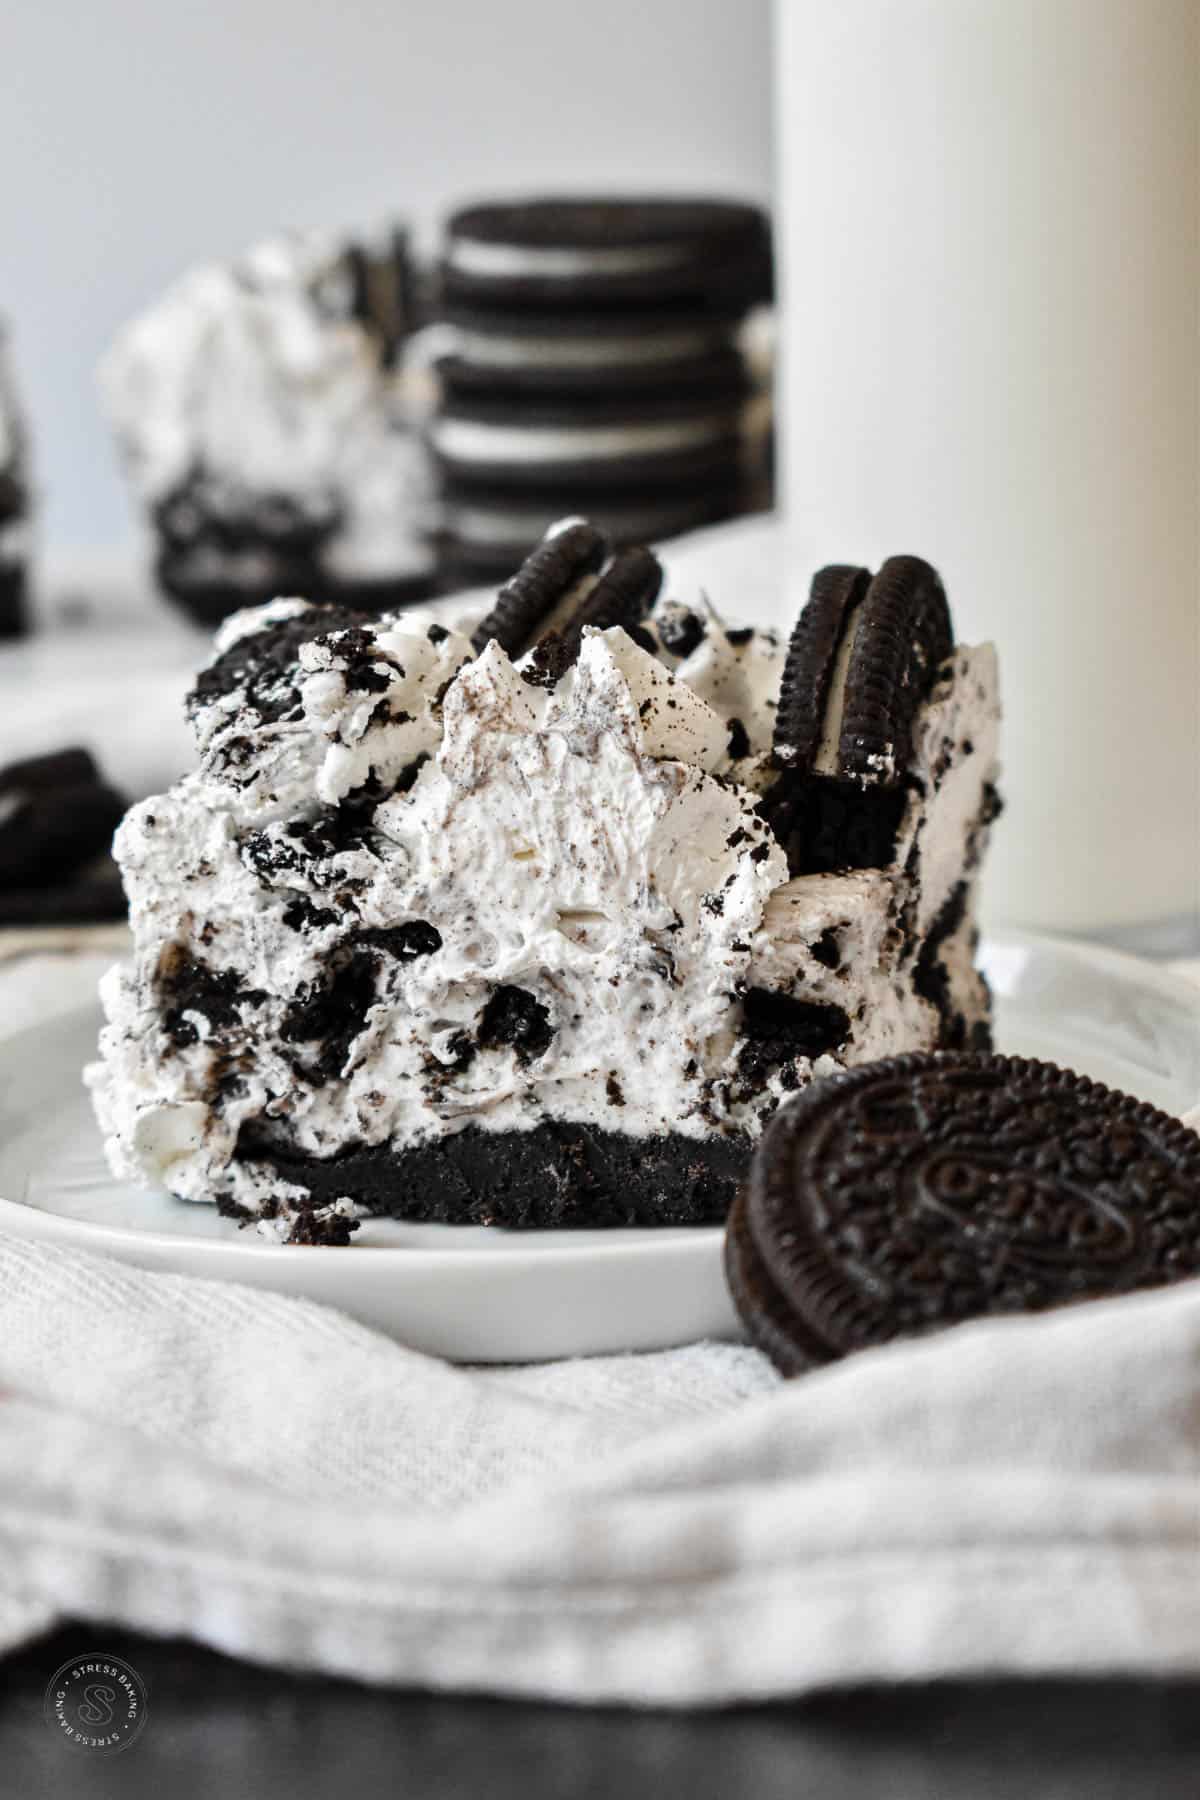 Slice of Oreo no bake dessert with an Oreo crust and black and white filling topped with whipped frosting and Oreo garnish with a glass of milk